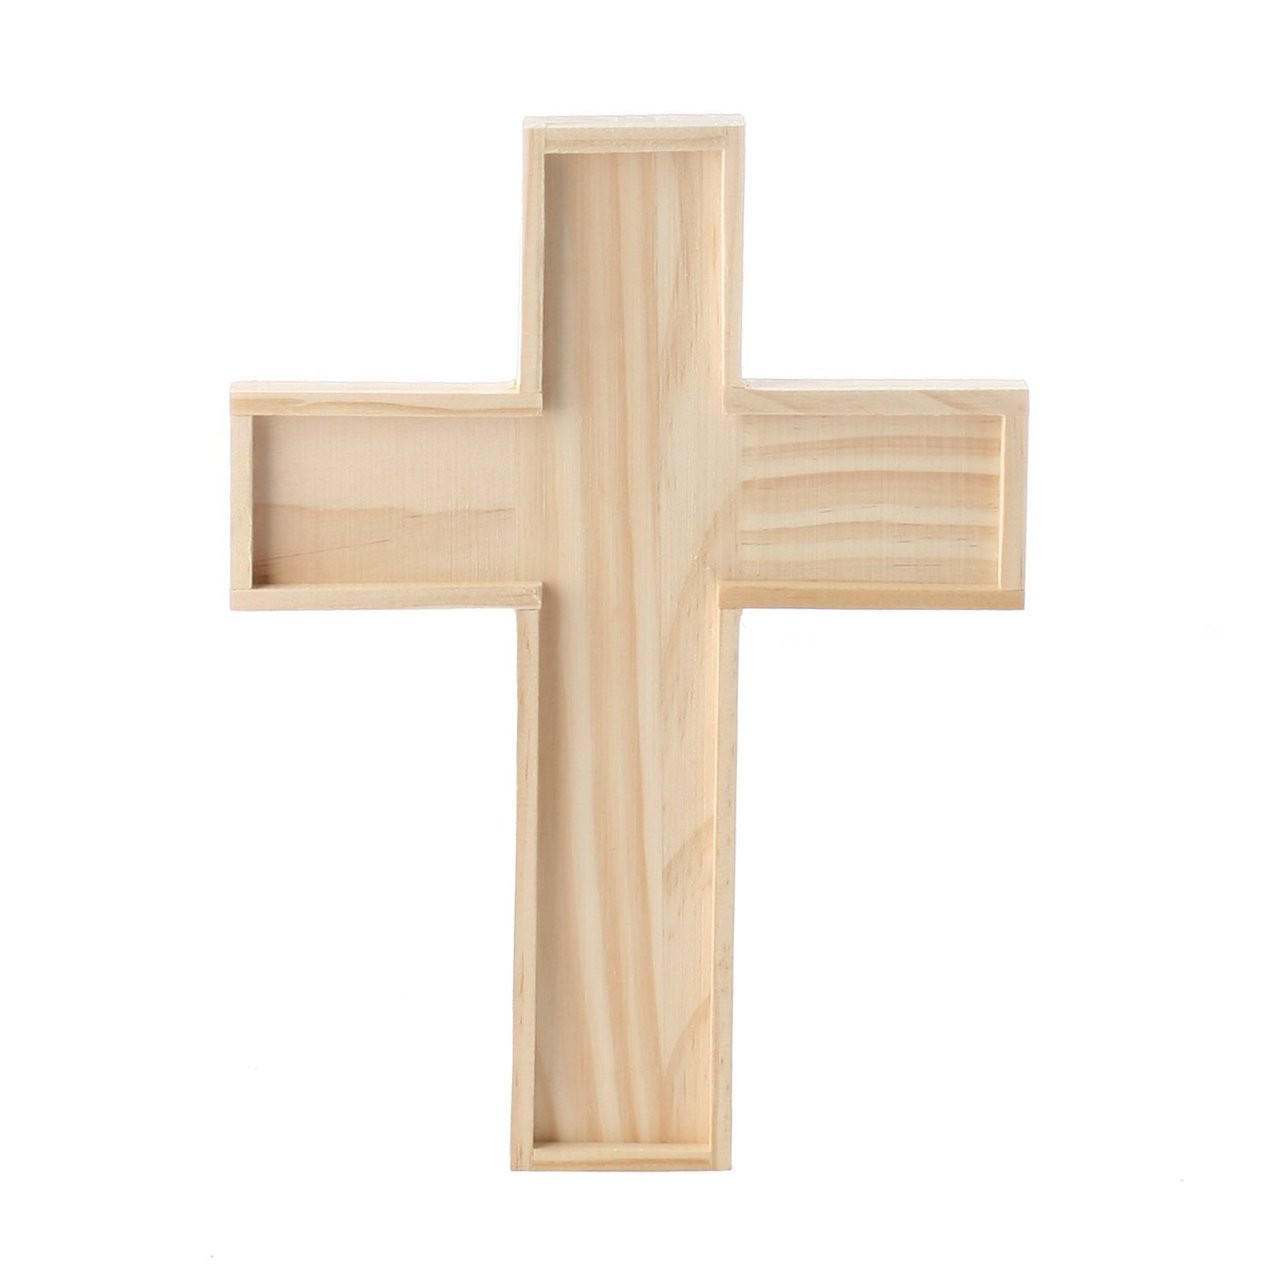 Unfinished Wooden Crosses for Painting and Crafting - 9 H x 6.5 W - Bulk  Case of 72 Crosses